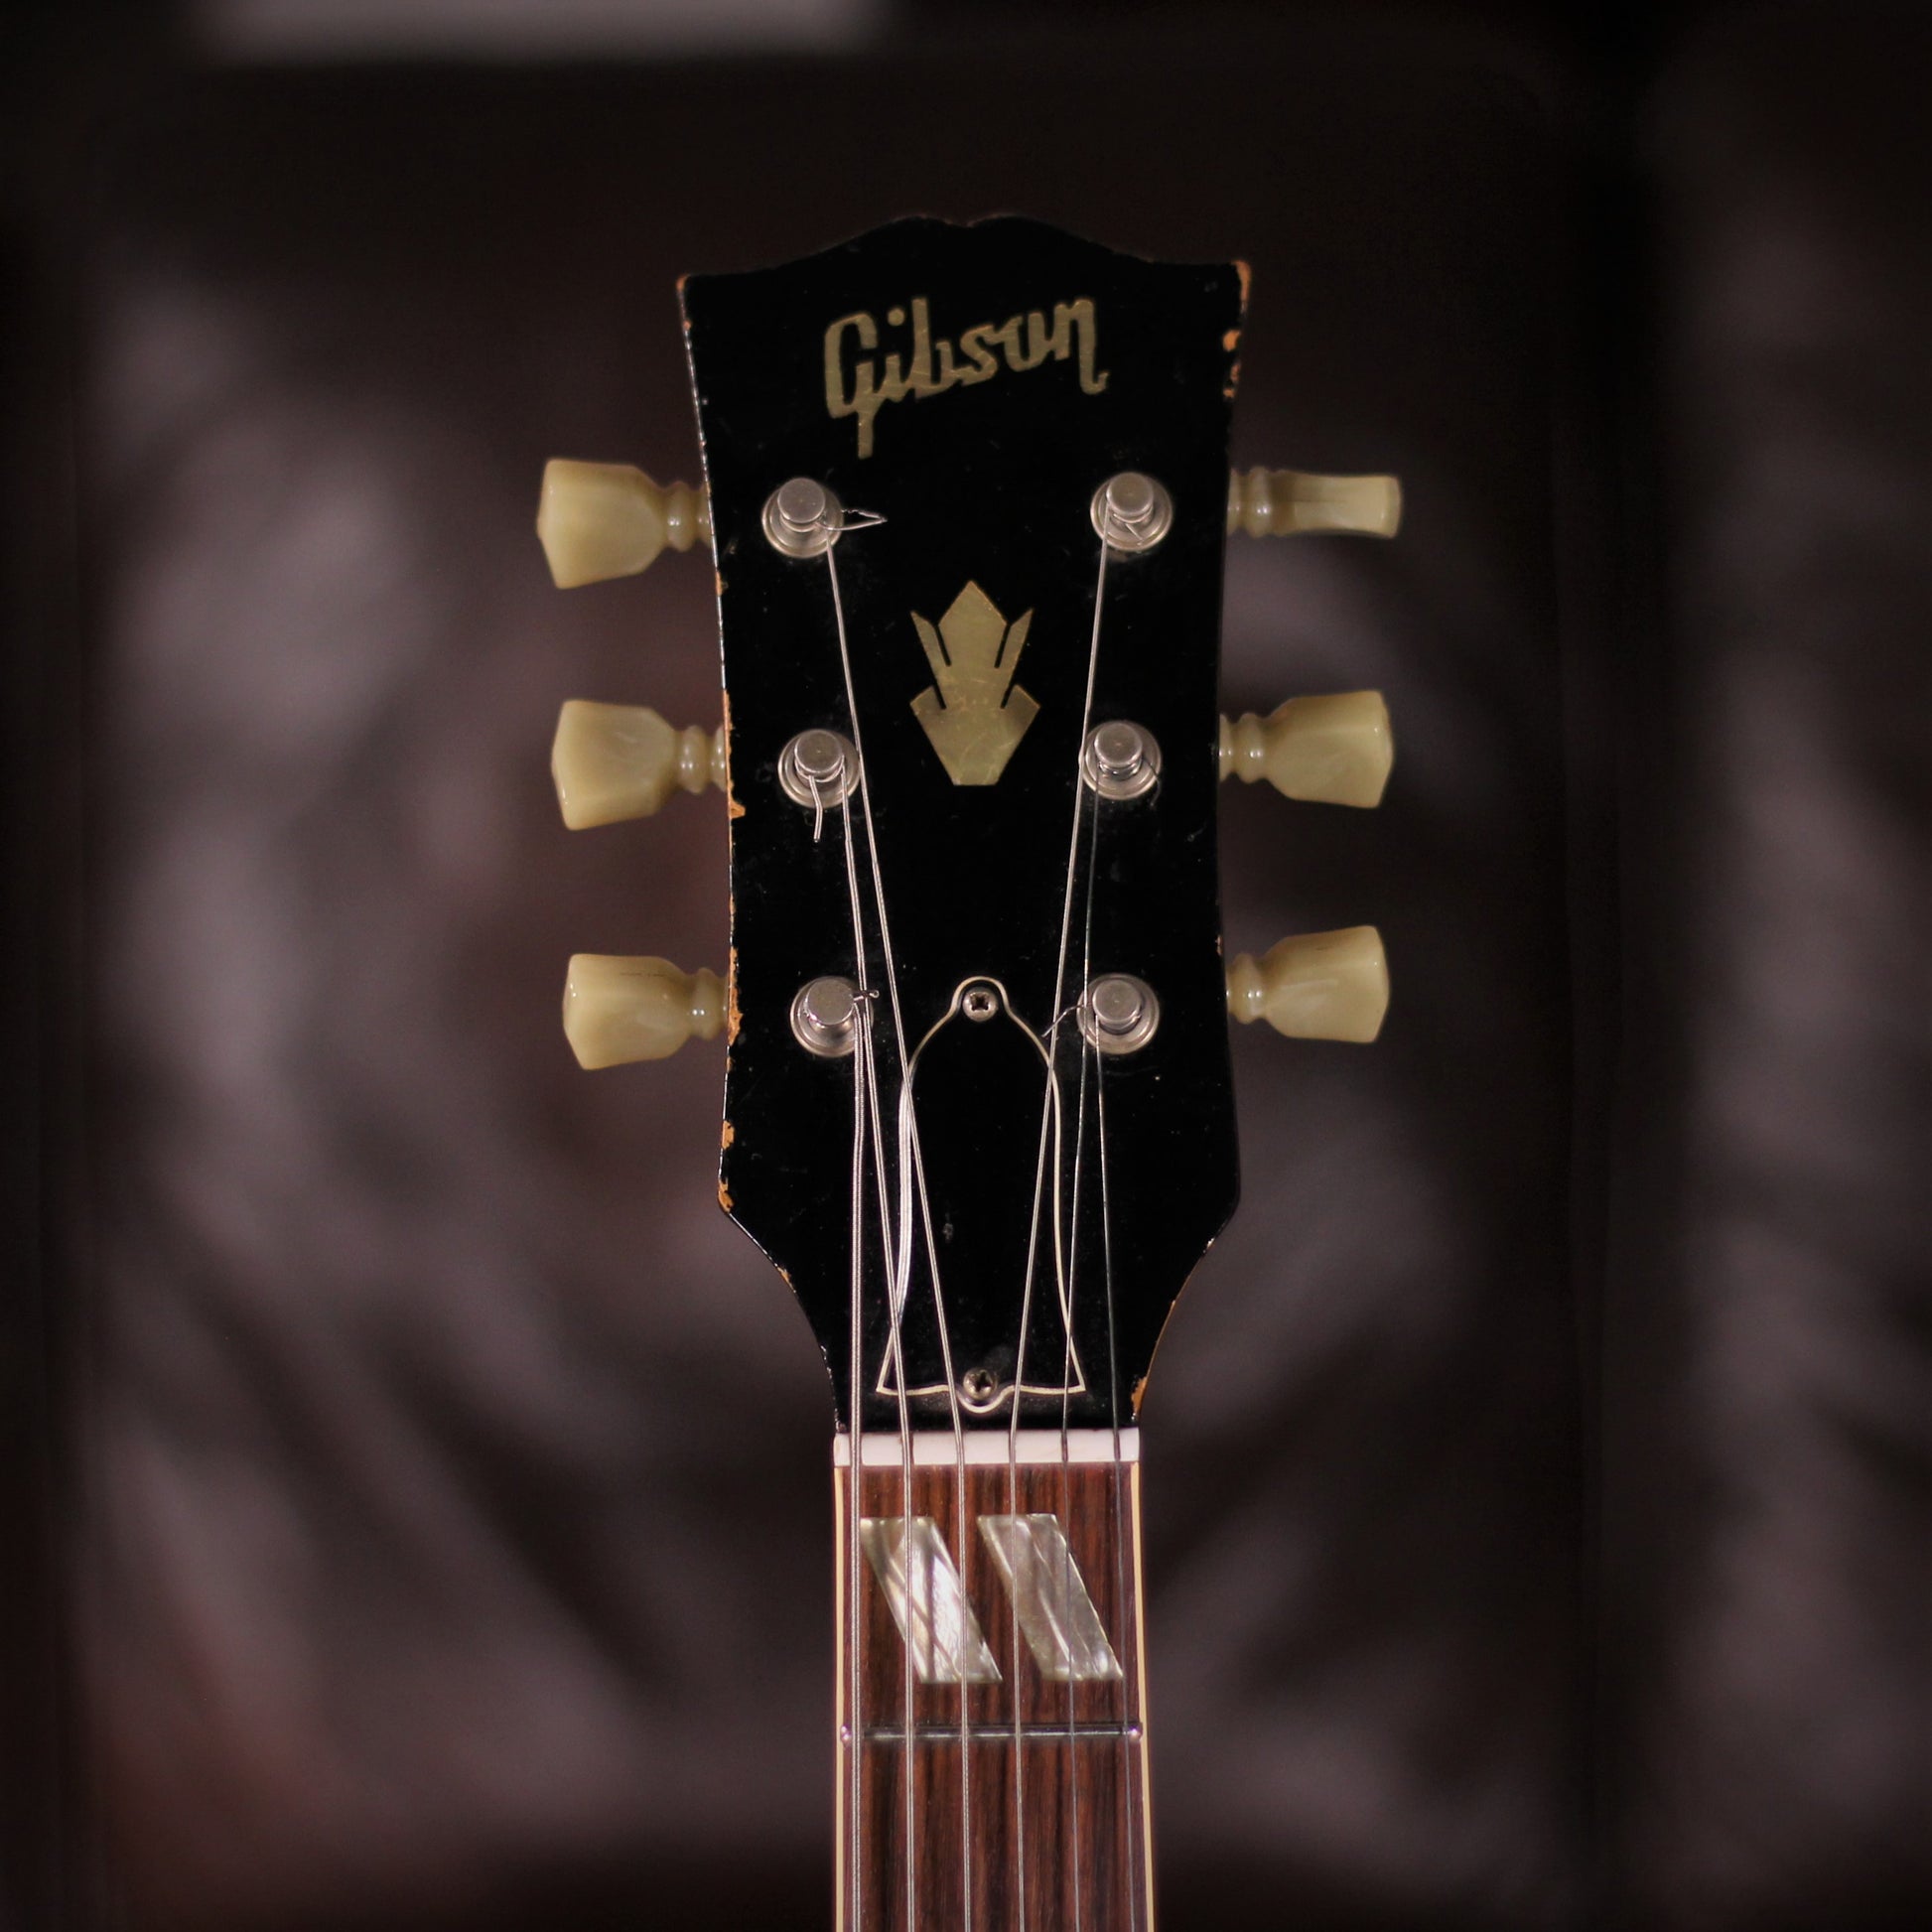 Used - Gibson ES175 1966 headstock